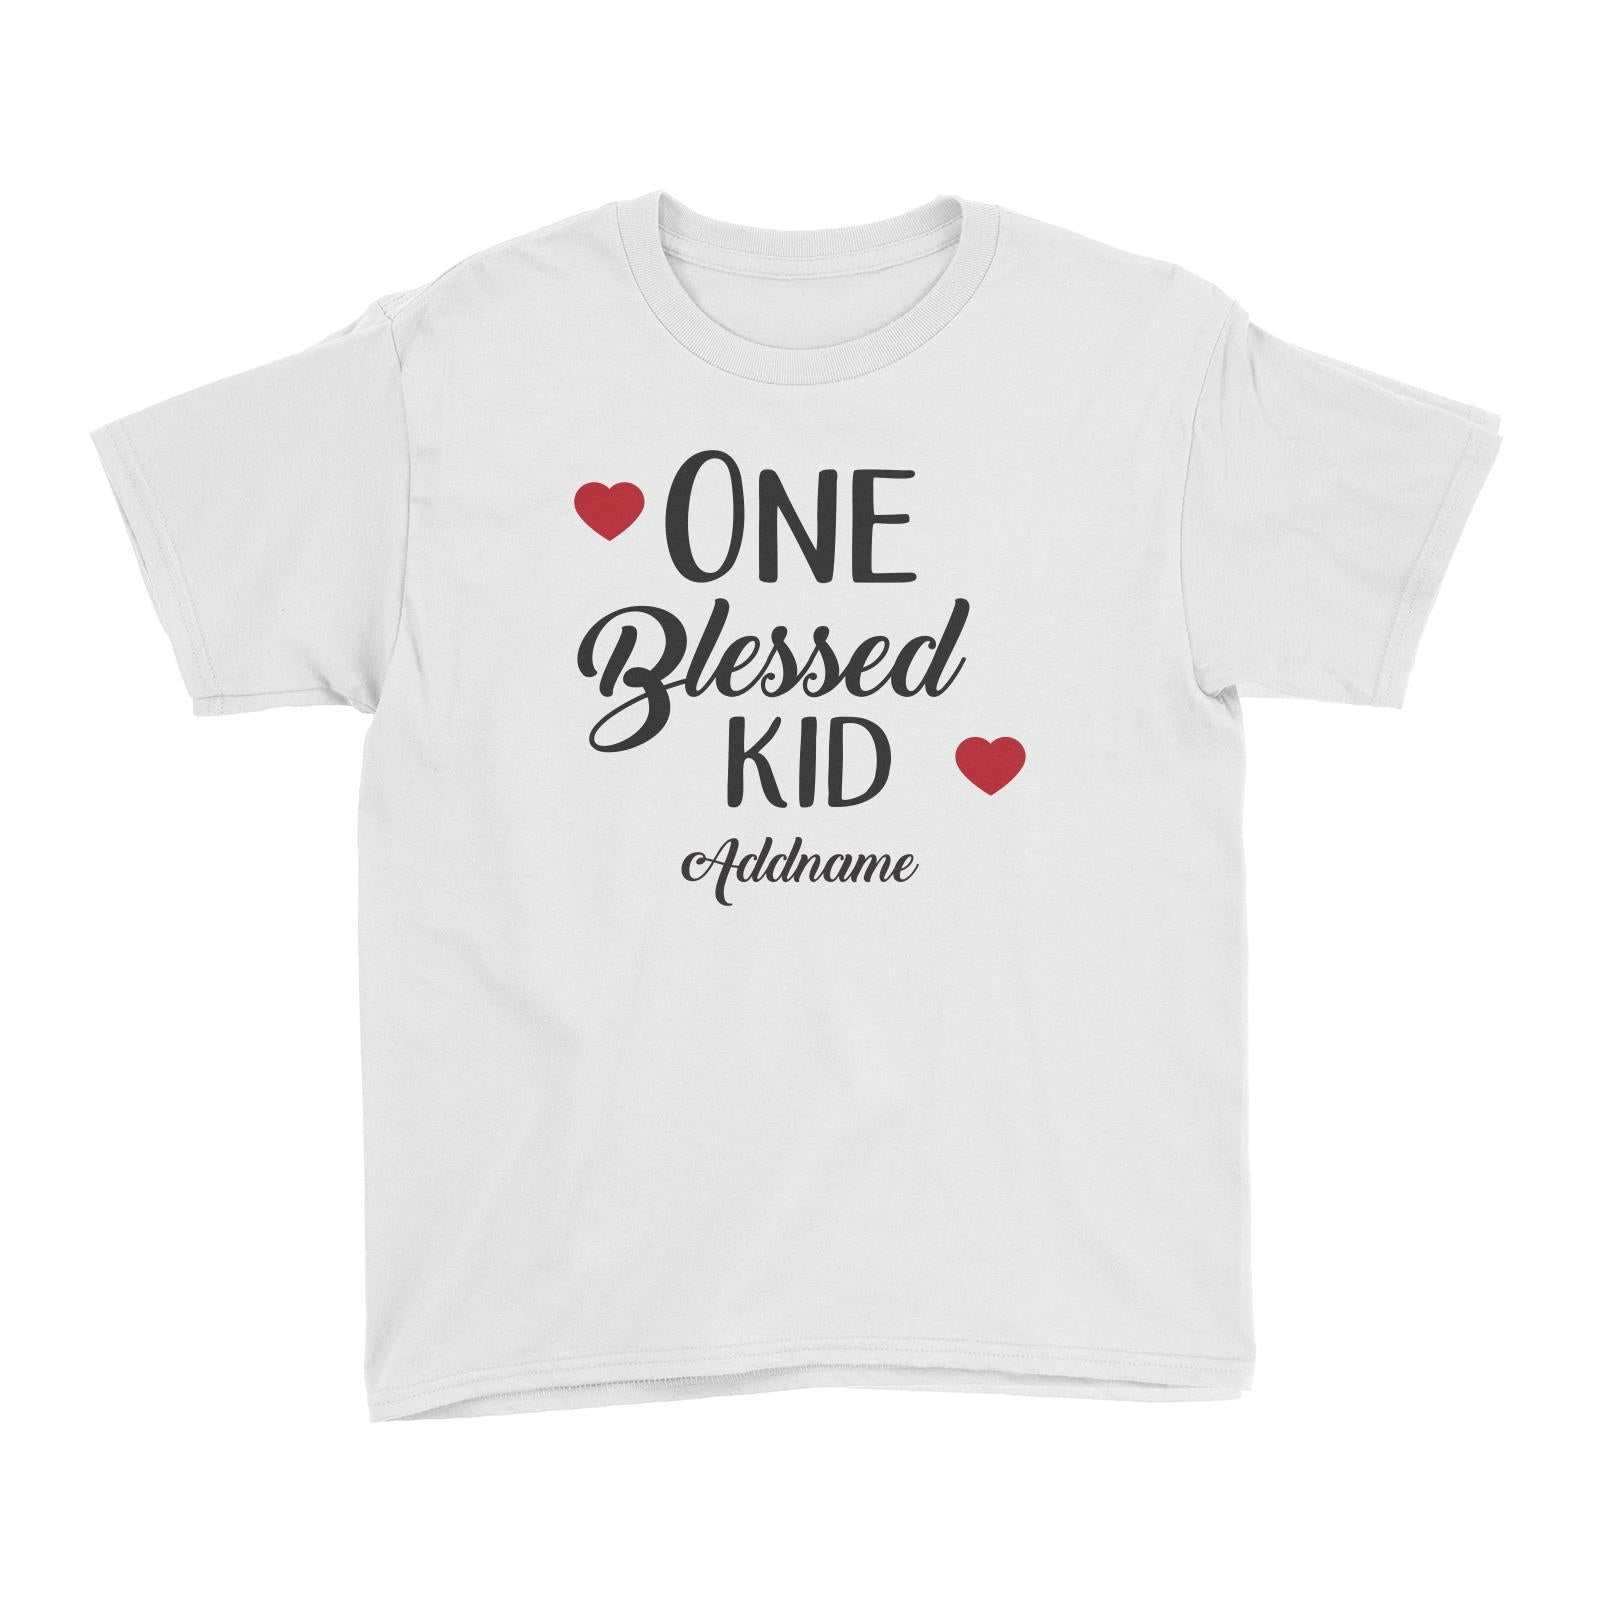 Christian Series One Blessed Kid Addname Kid's T-Shirt